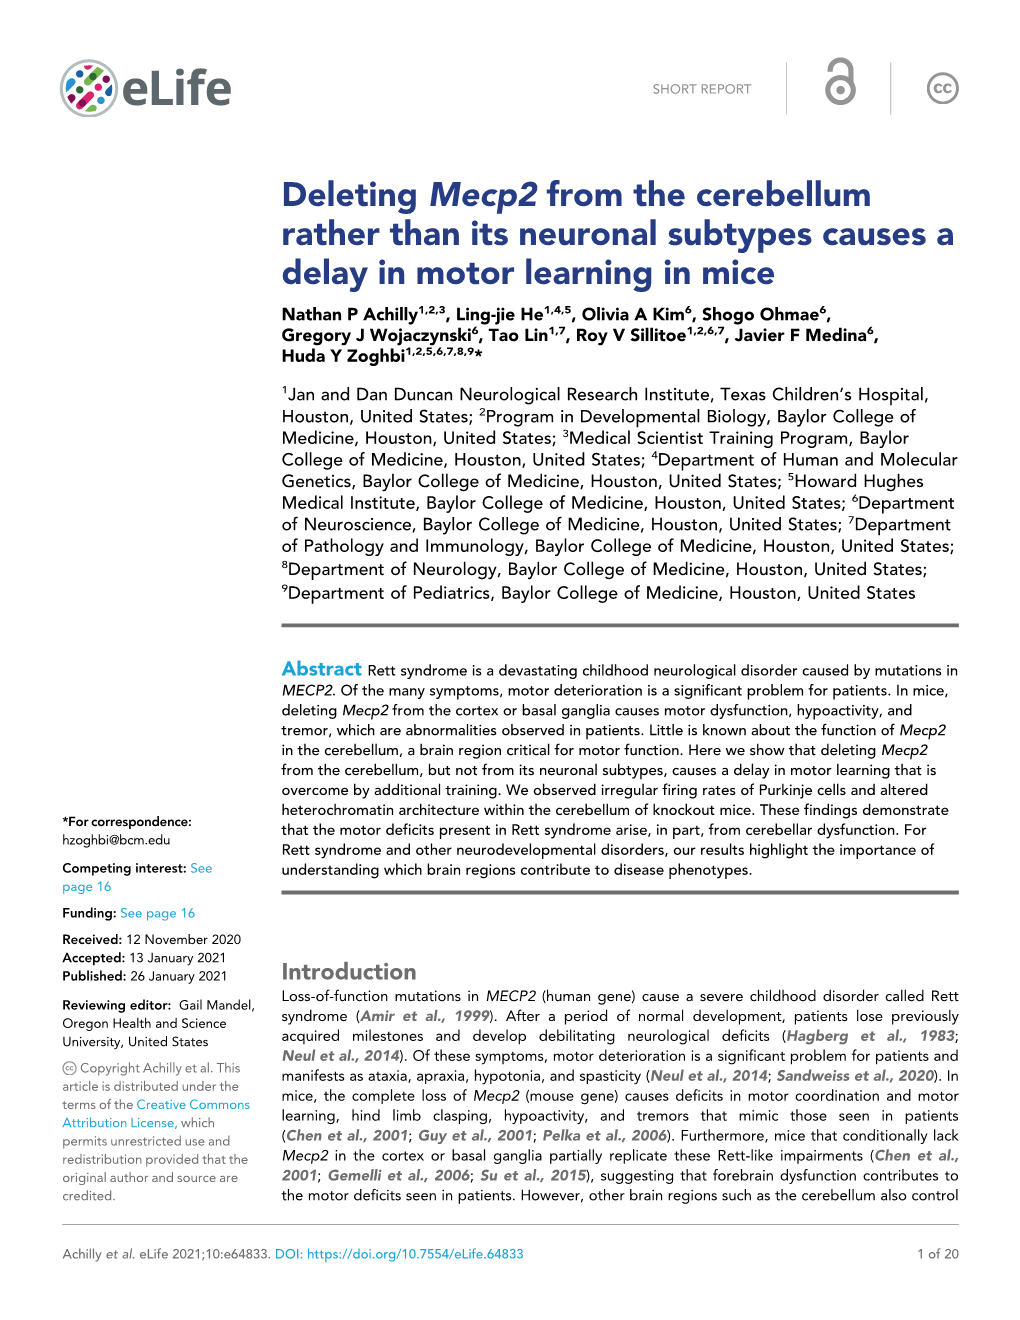 Deleting Mecp2 from the Cerebellum Rather Than Its Neuronal Subtypes